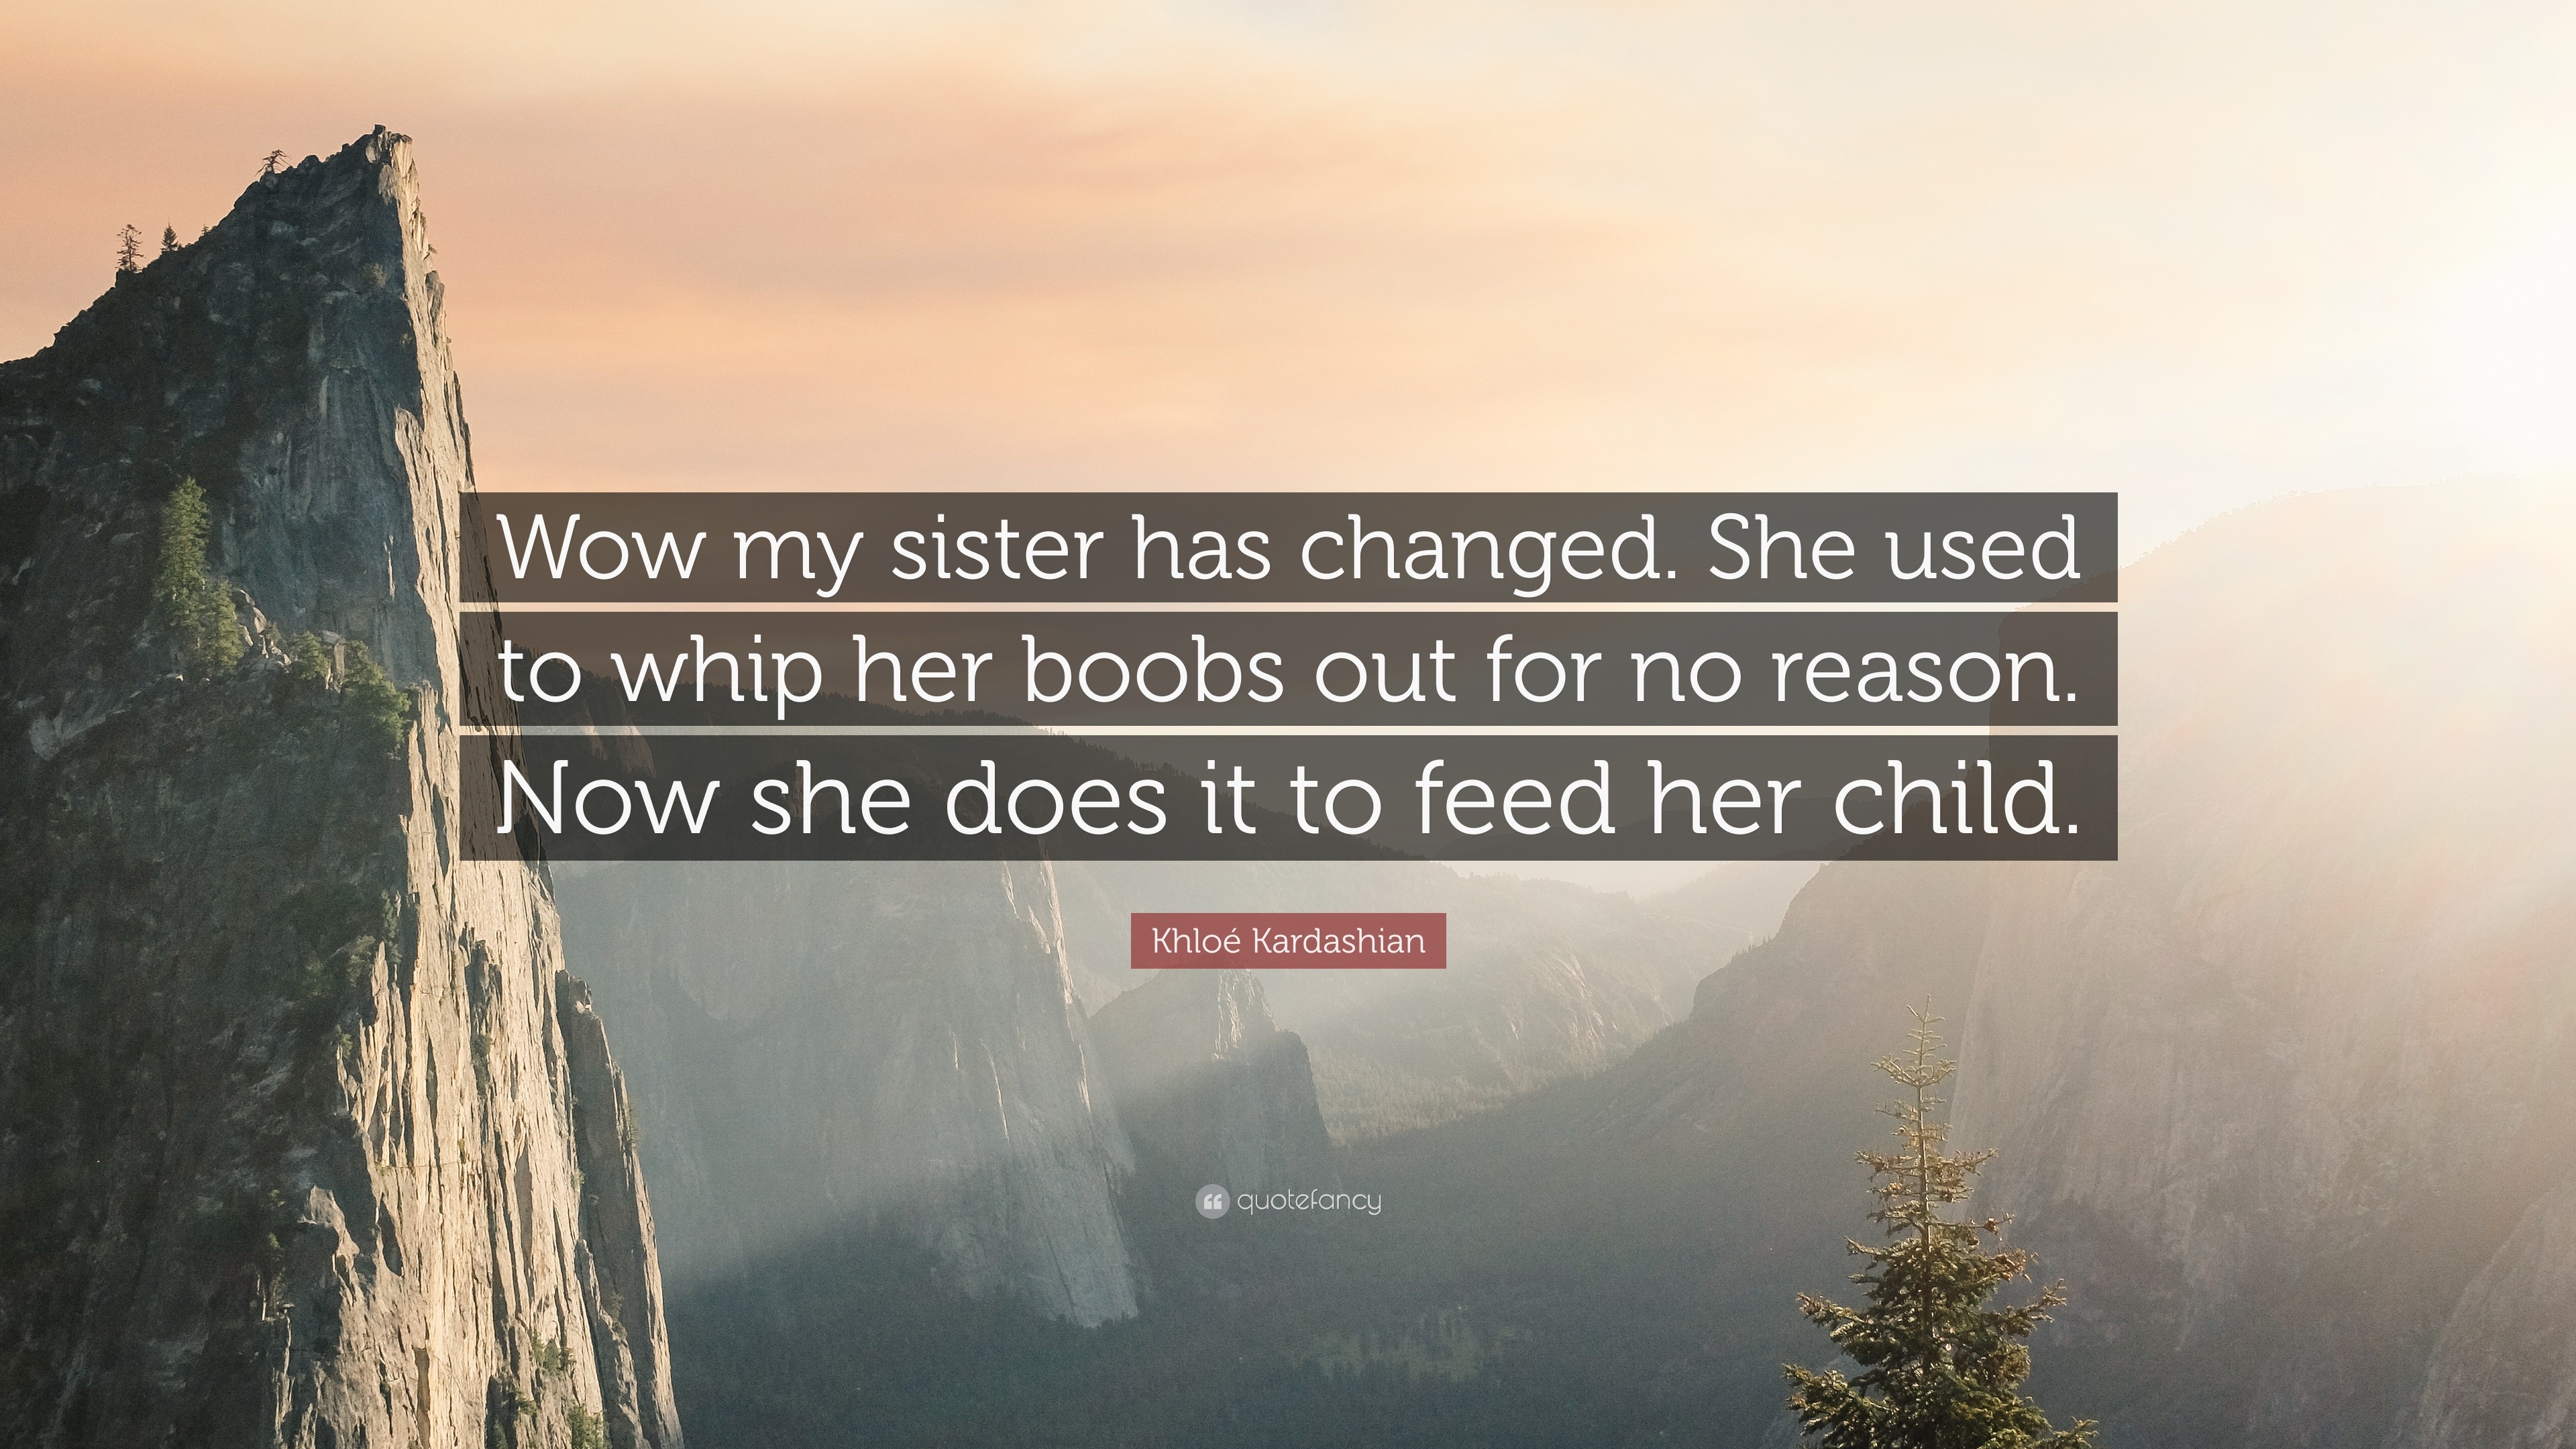 Khloé Kardashian Quote: “Wow my sister has changed. She used to